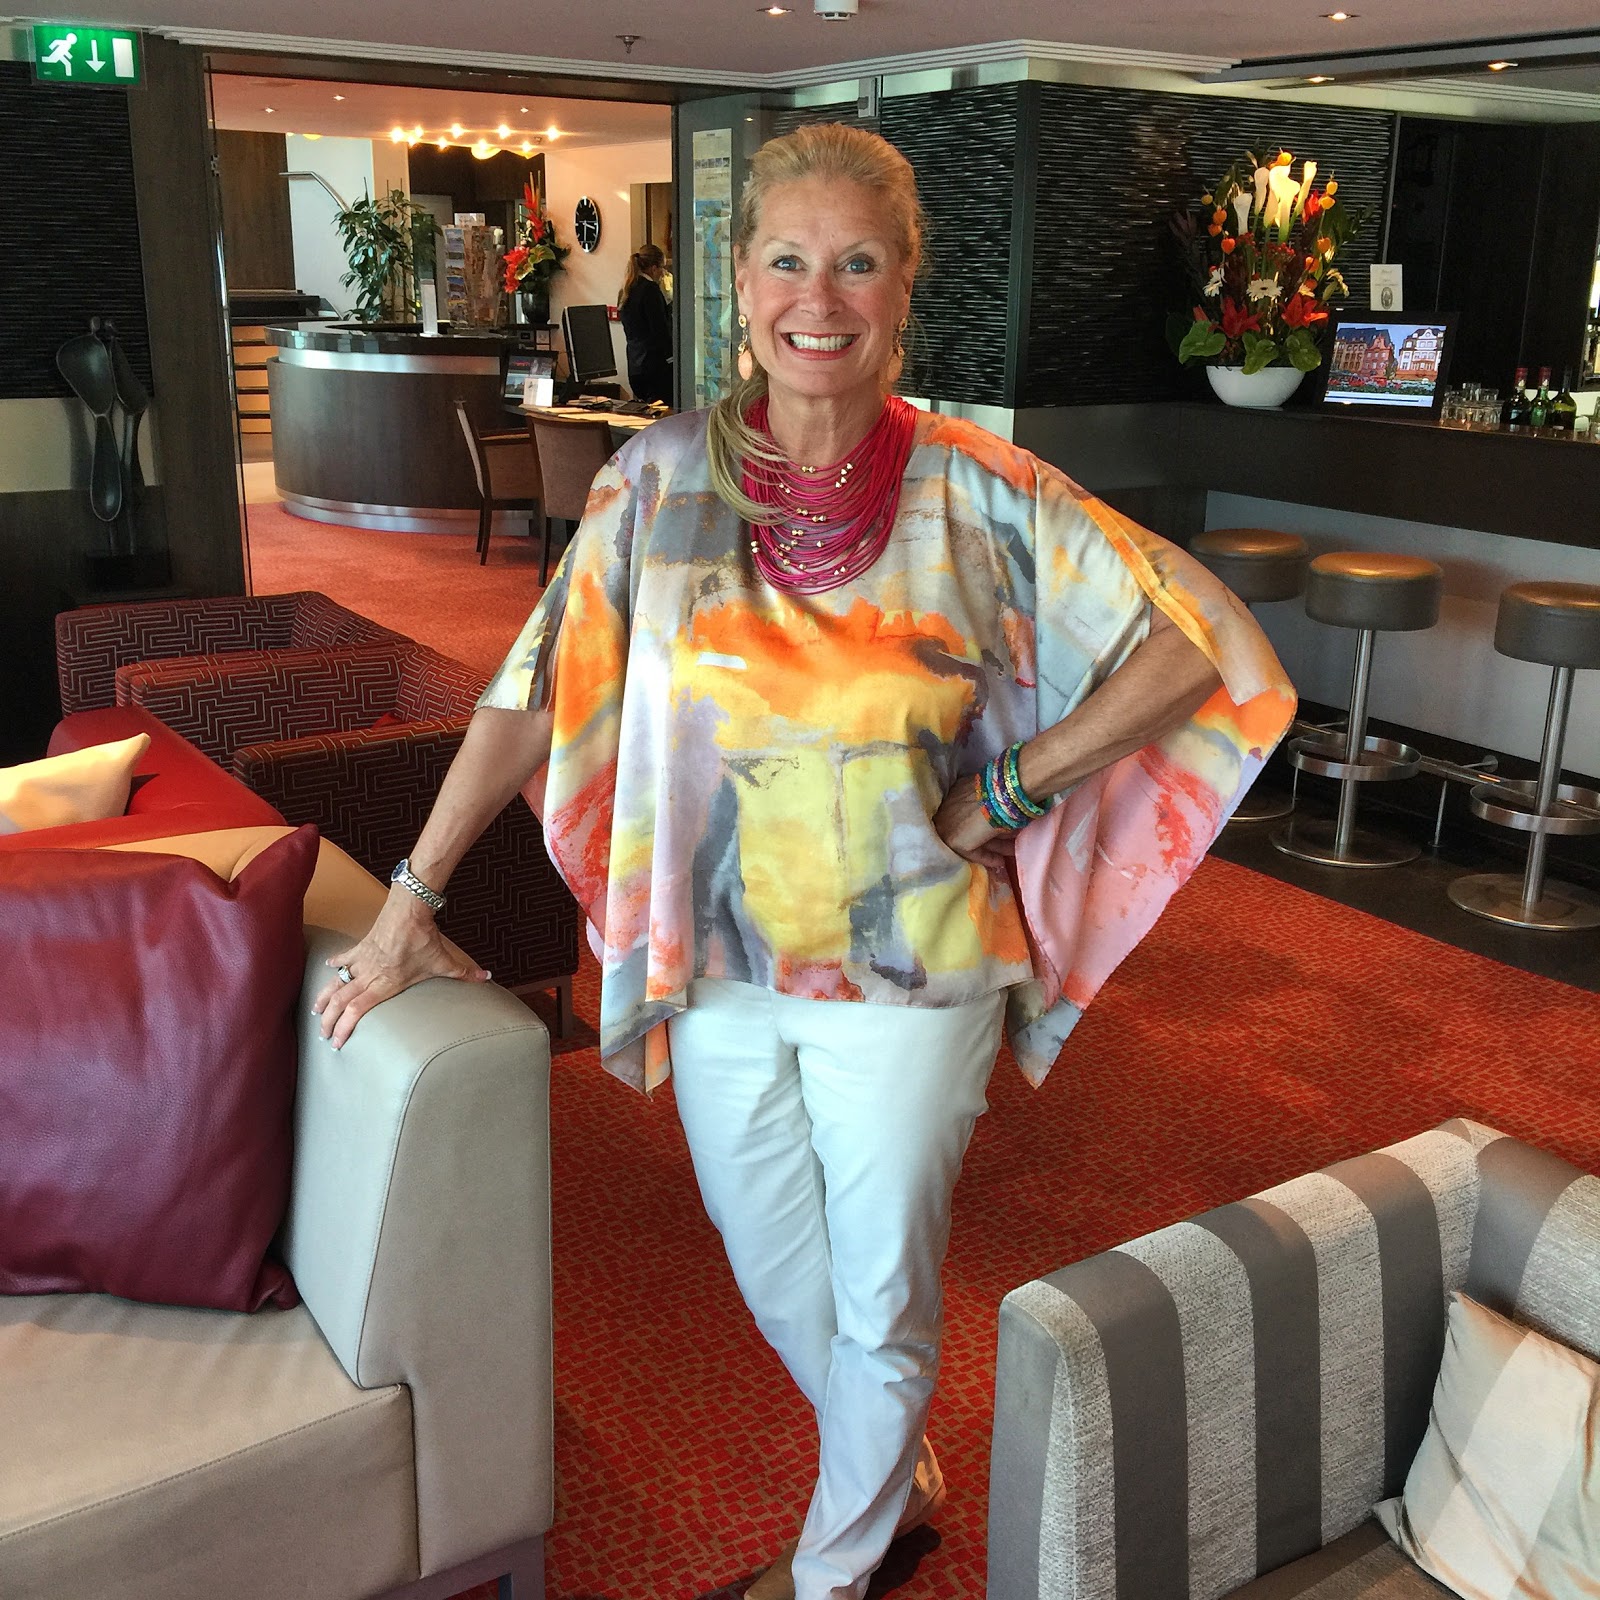 Travel over 50: Rhine River Cruise: The Video!